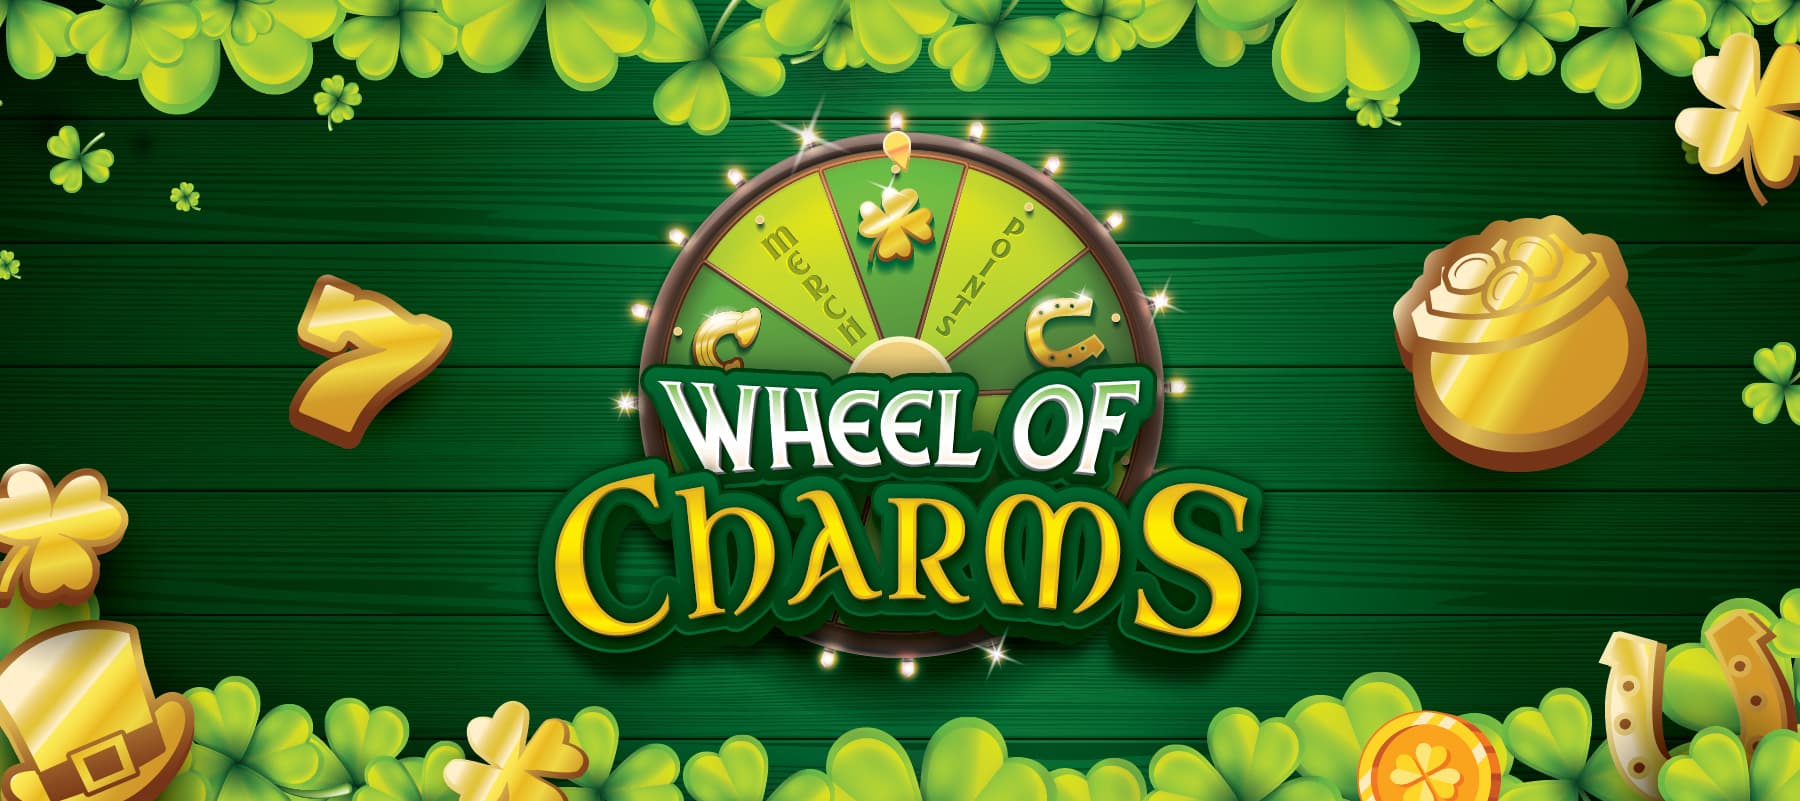 wheel of charms promotion at point place casino